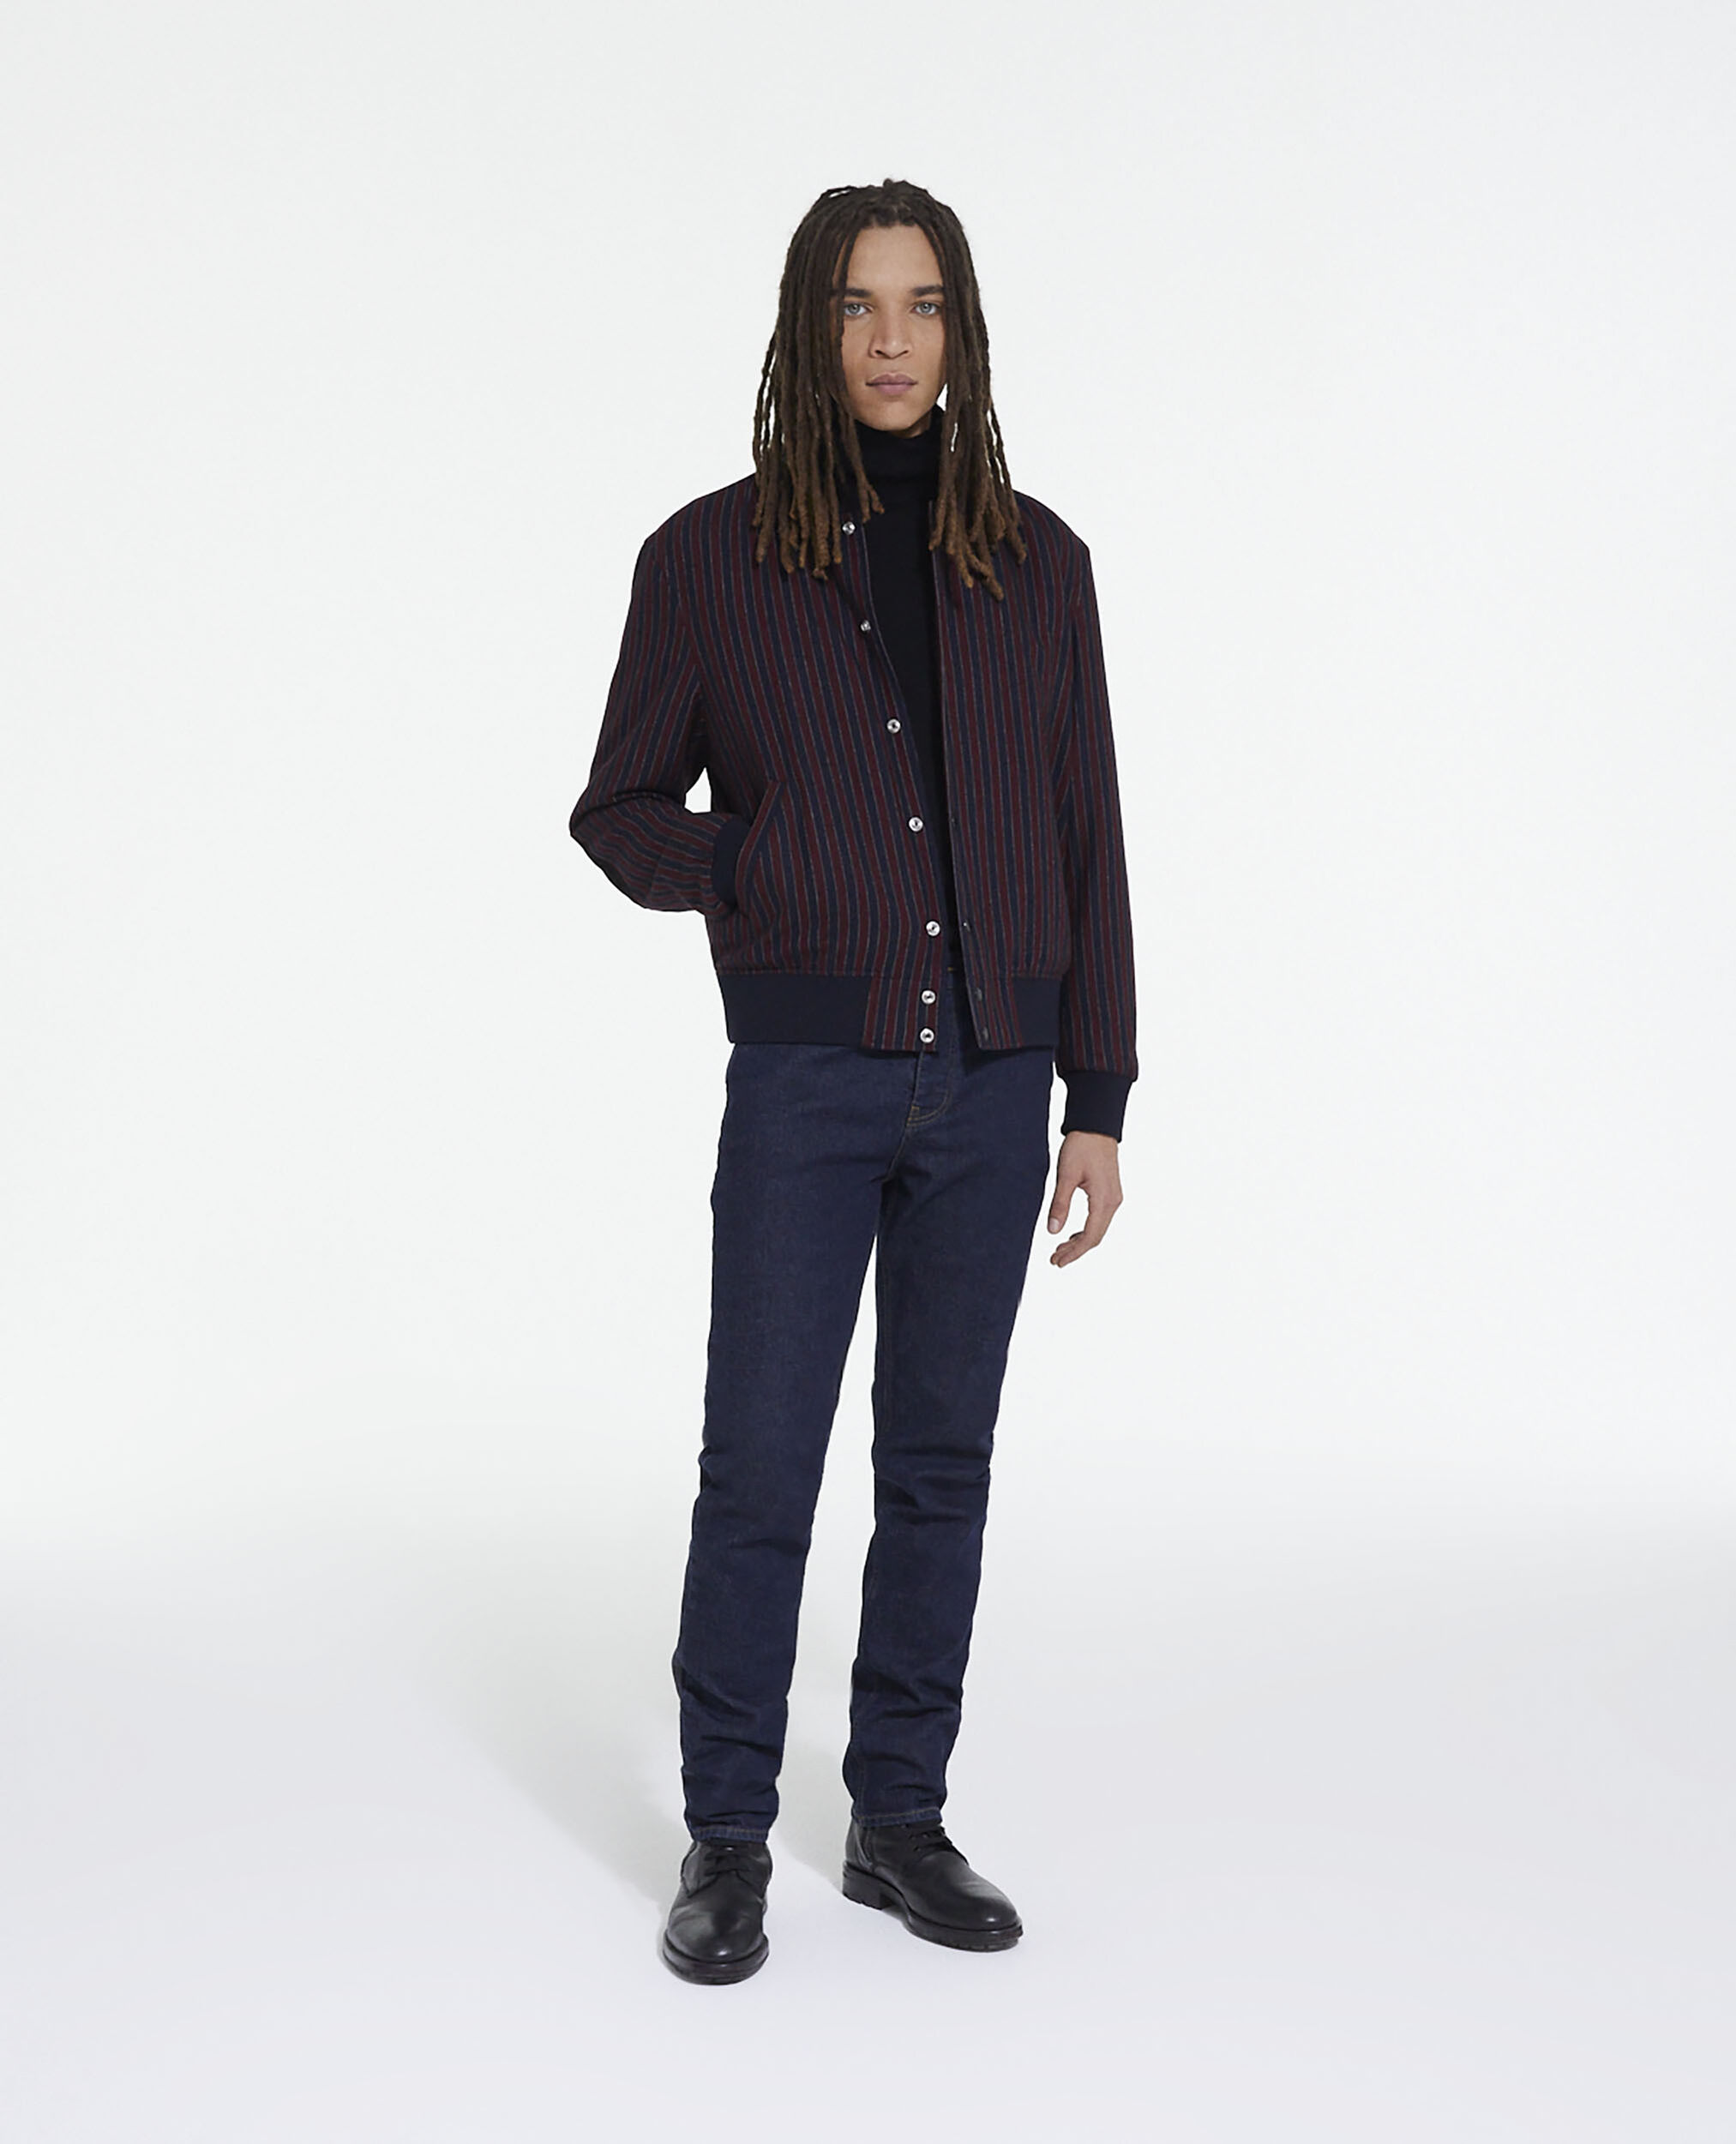 Chaqueta rayas, BORDEAUX / NAVY, hi-res image number null